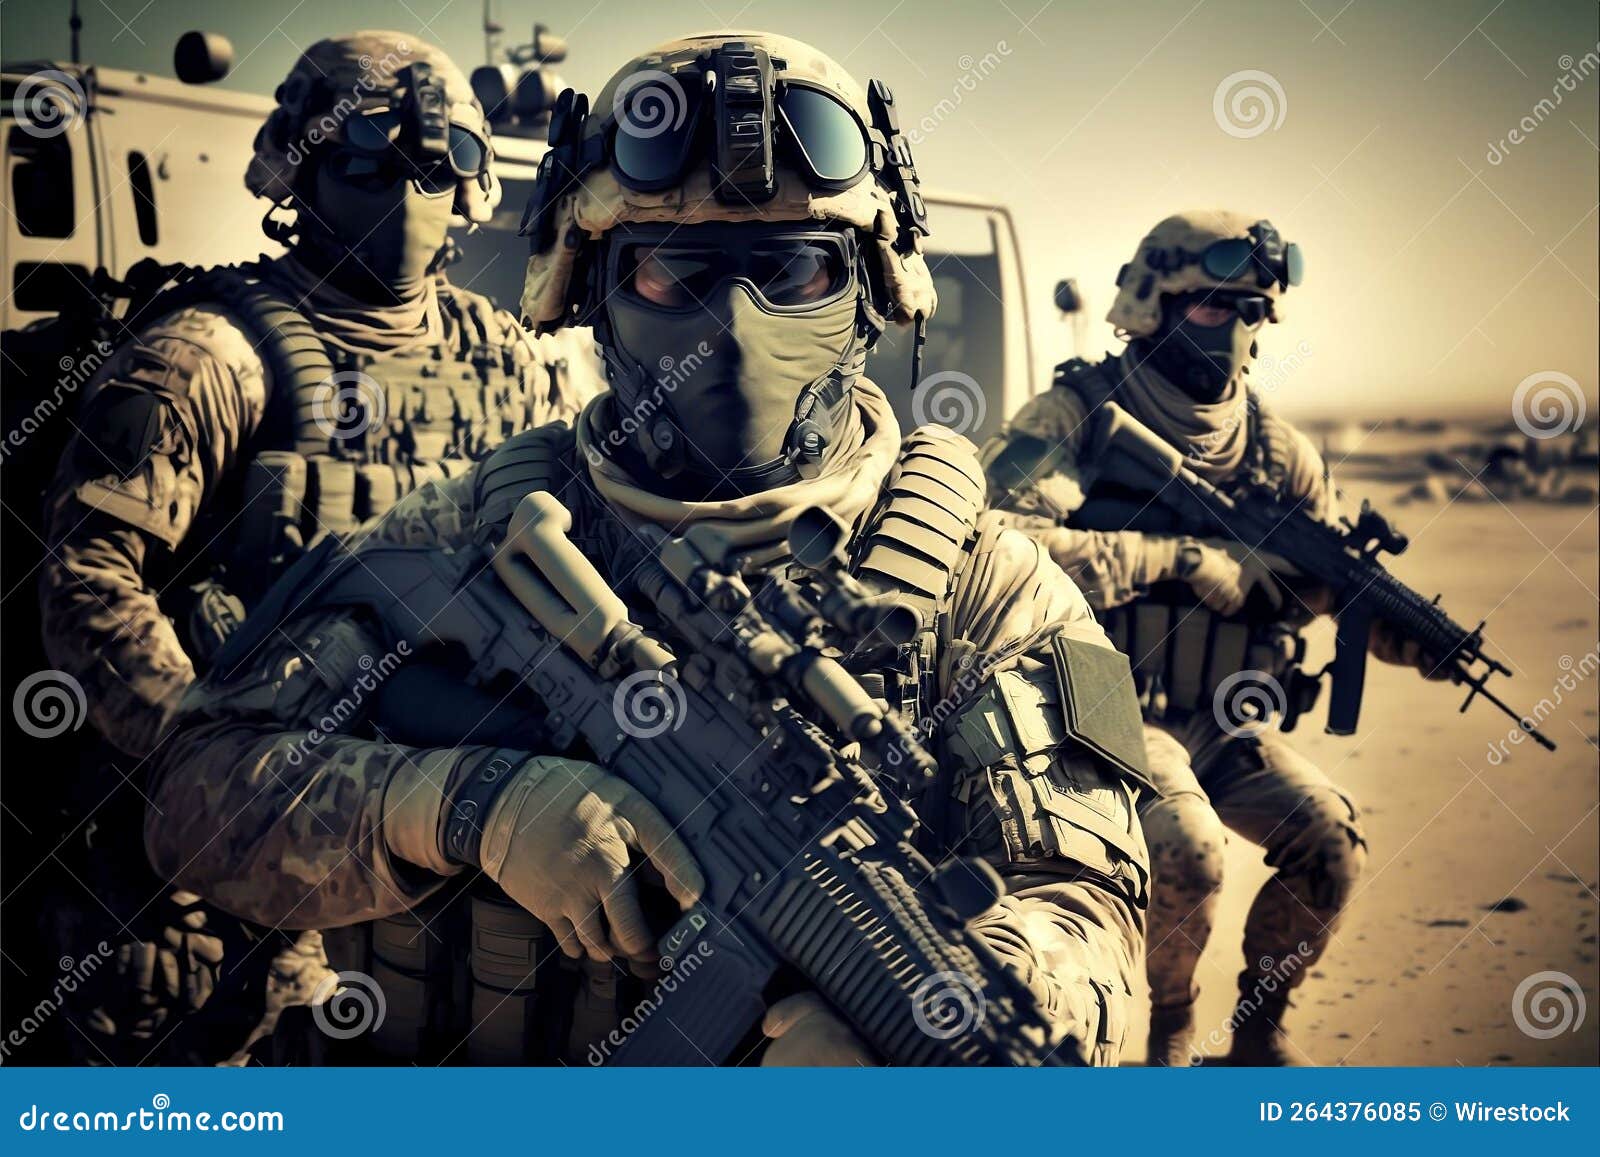 https://thumbs.dreamstime.com/z/ai-generated-illustration-special-forces-military-unit-full-tactical-gear-ai-generated-illustration-special-forces-264376085.jpg